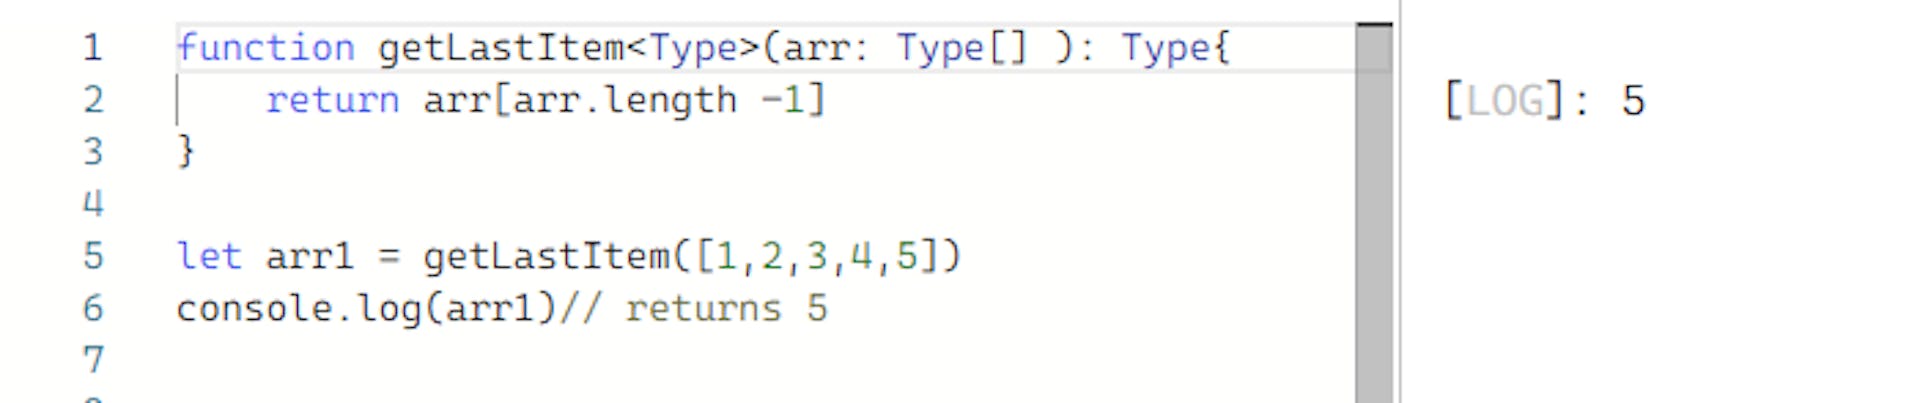 Specifying that the argument is an array type